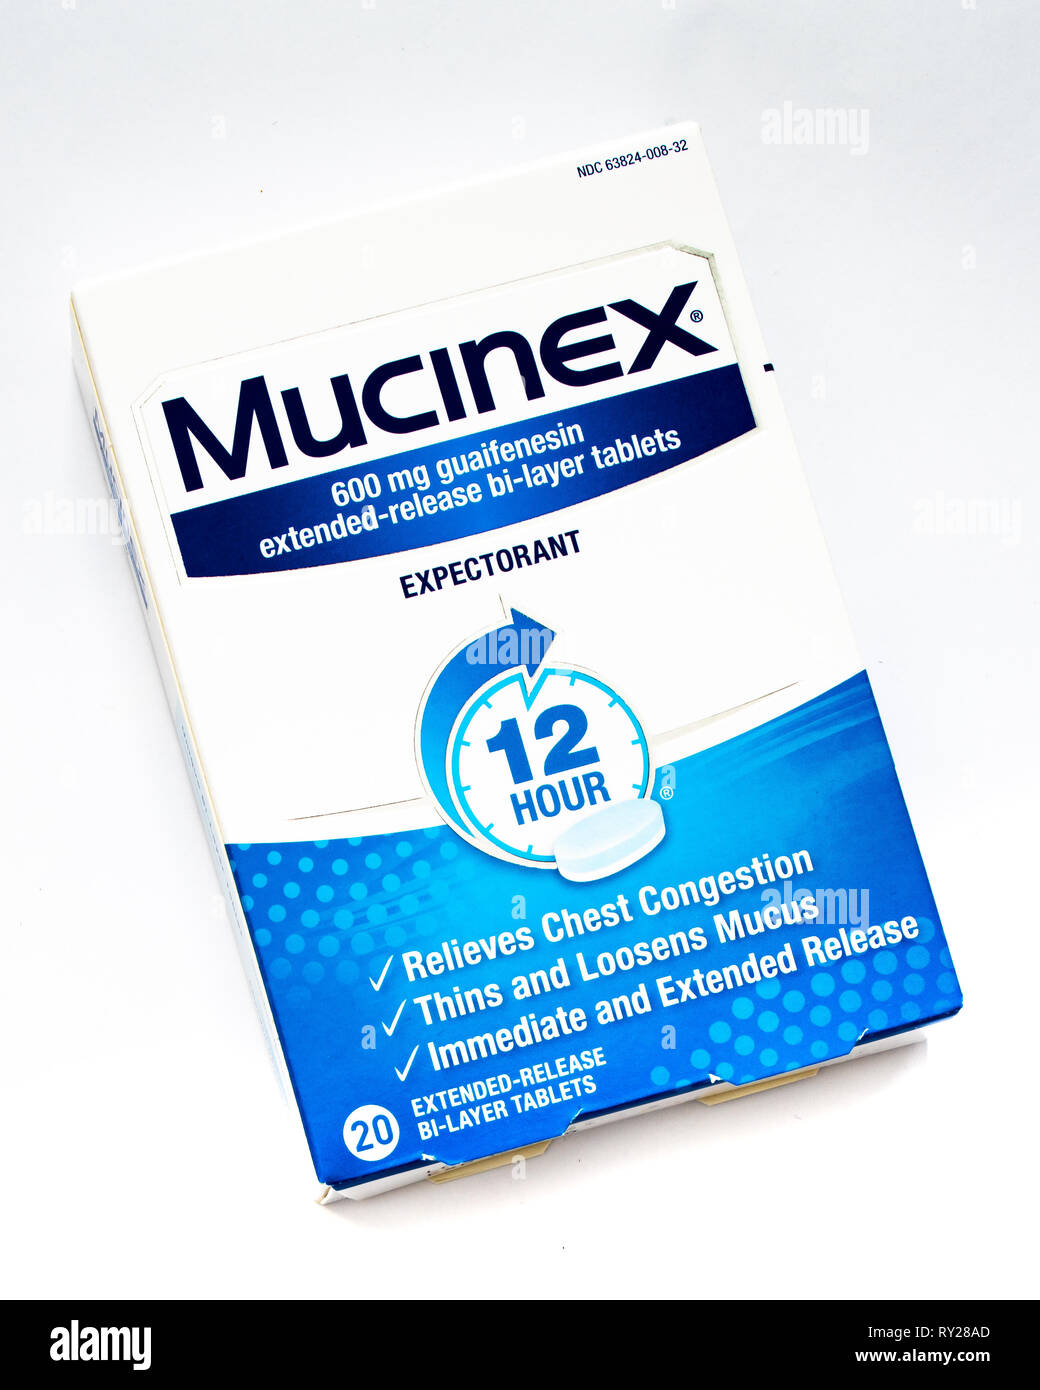 A package of Mucinex extended release bi-layer tablets to relieve chest congestion, thin and loosen mucus. Stock Photo